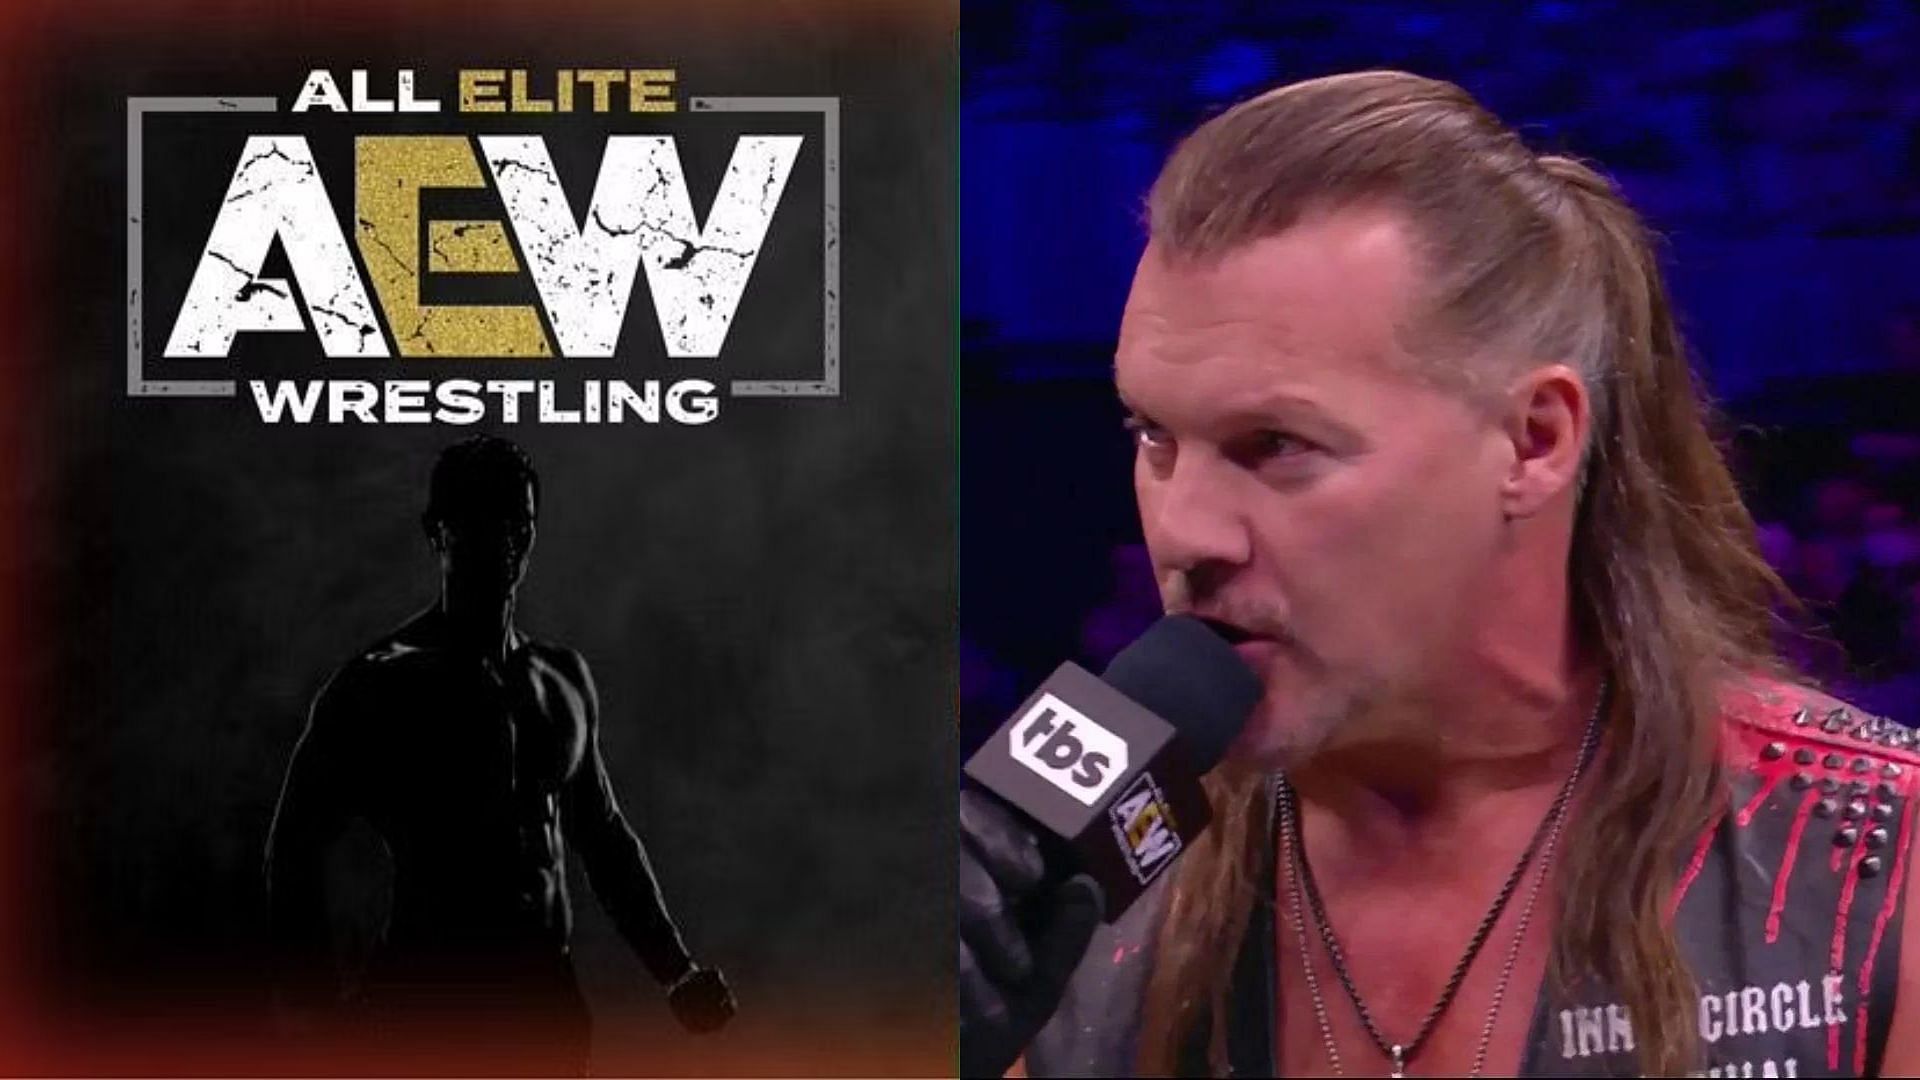 Yet another star is out with an injury in AEW